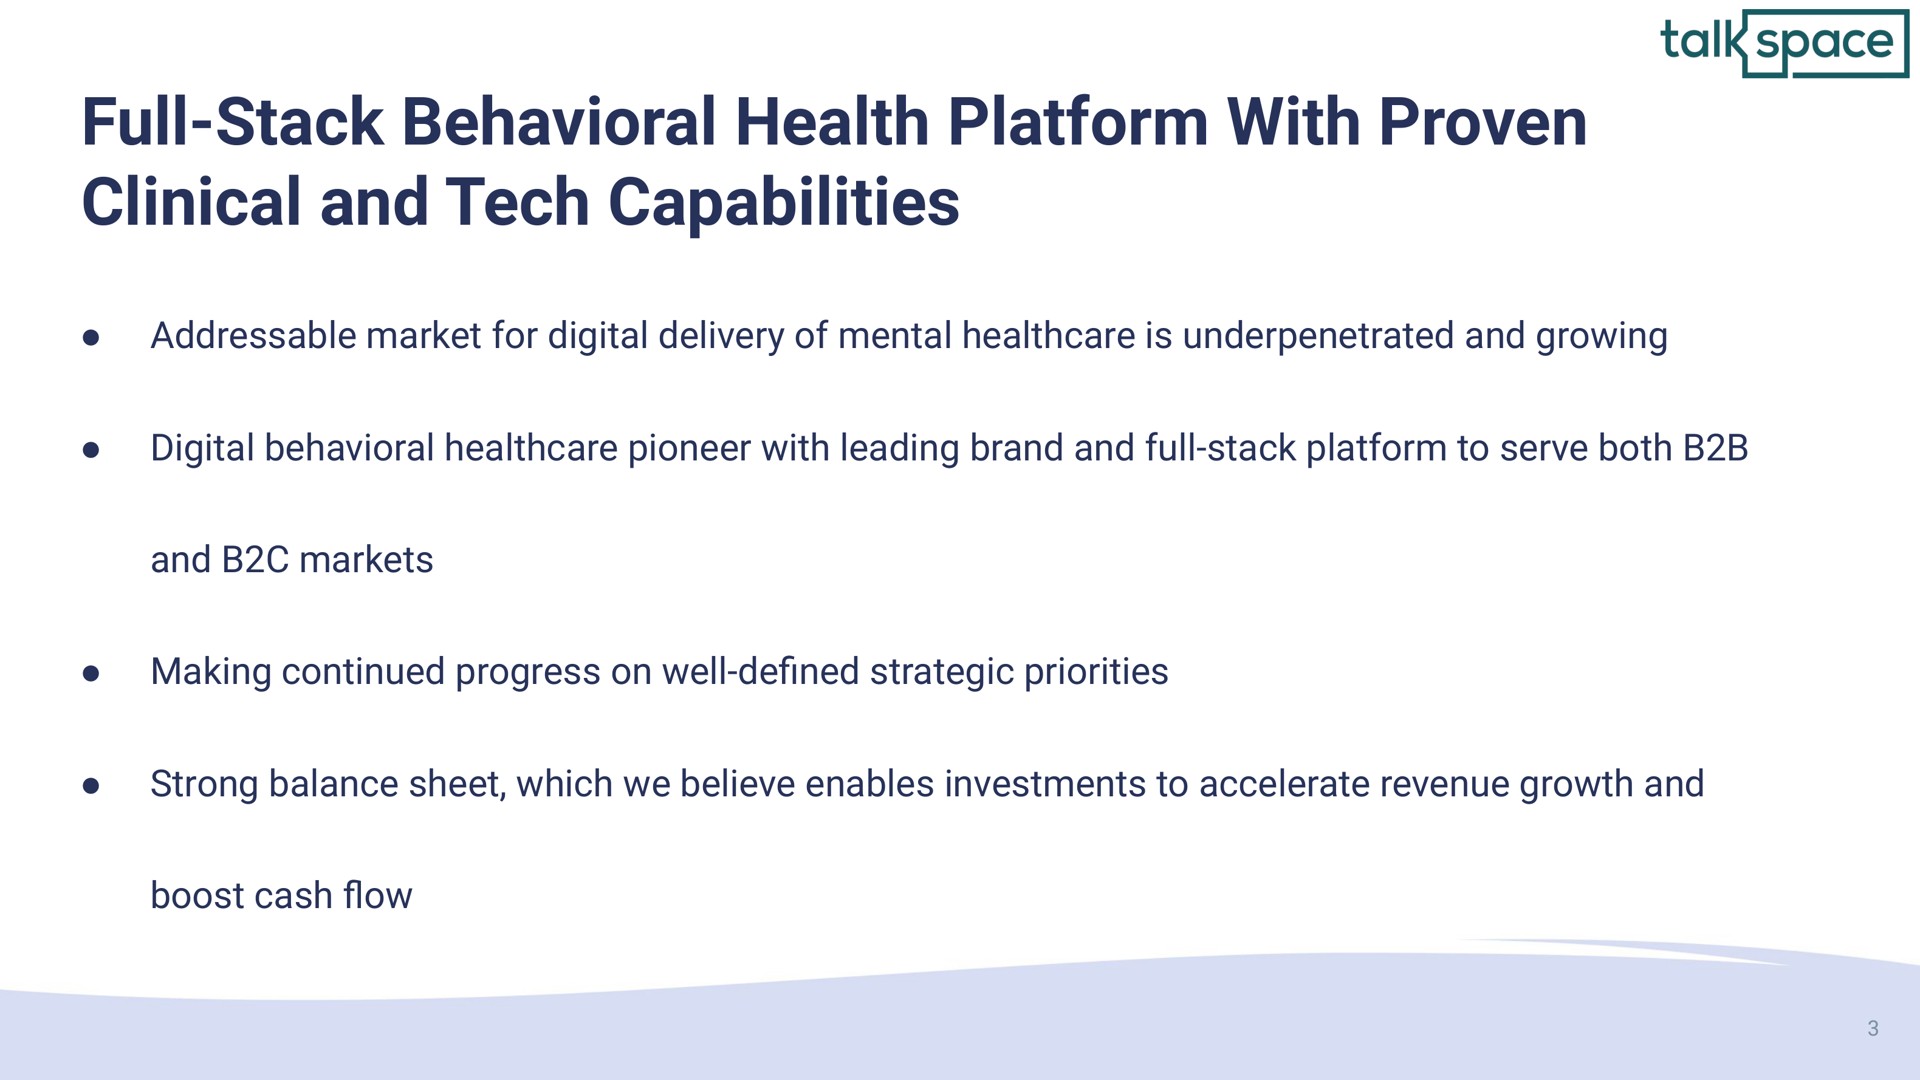 full stack behavioral health platform with proven clinical and tech capabilities | Talkspace